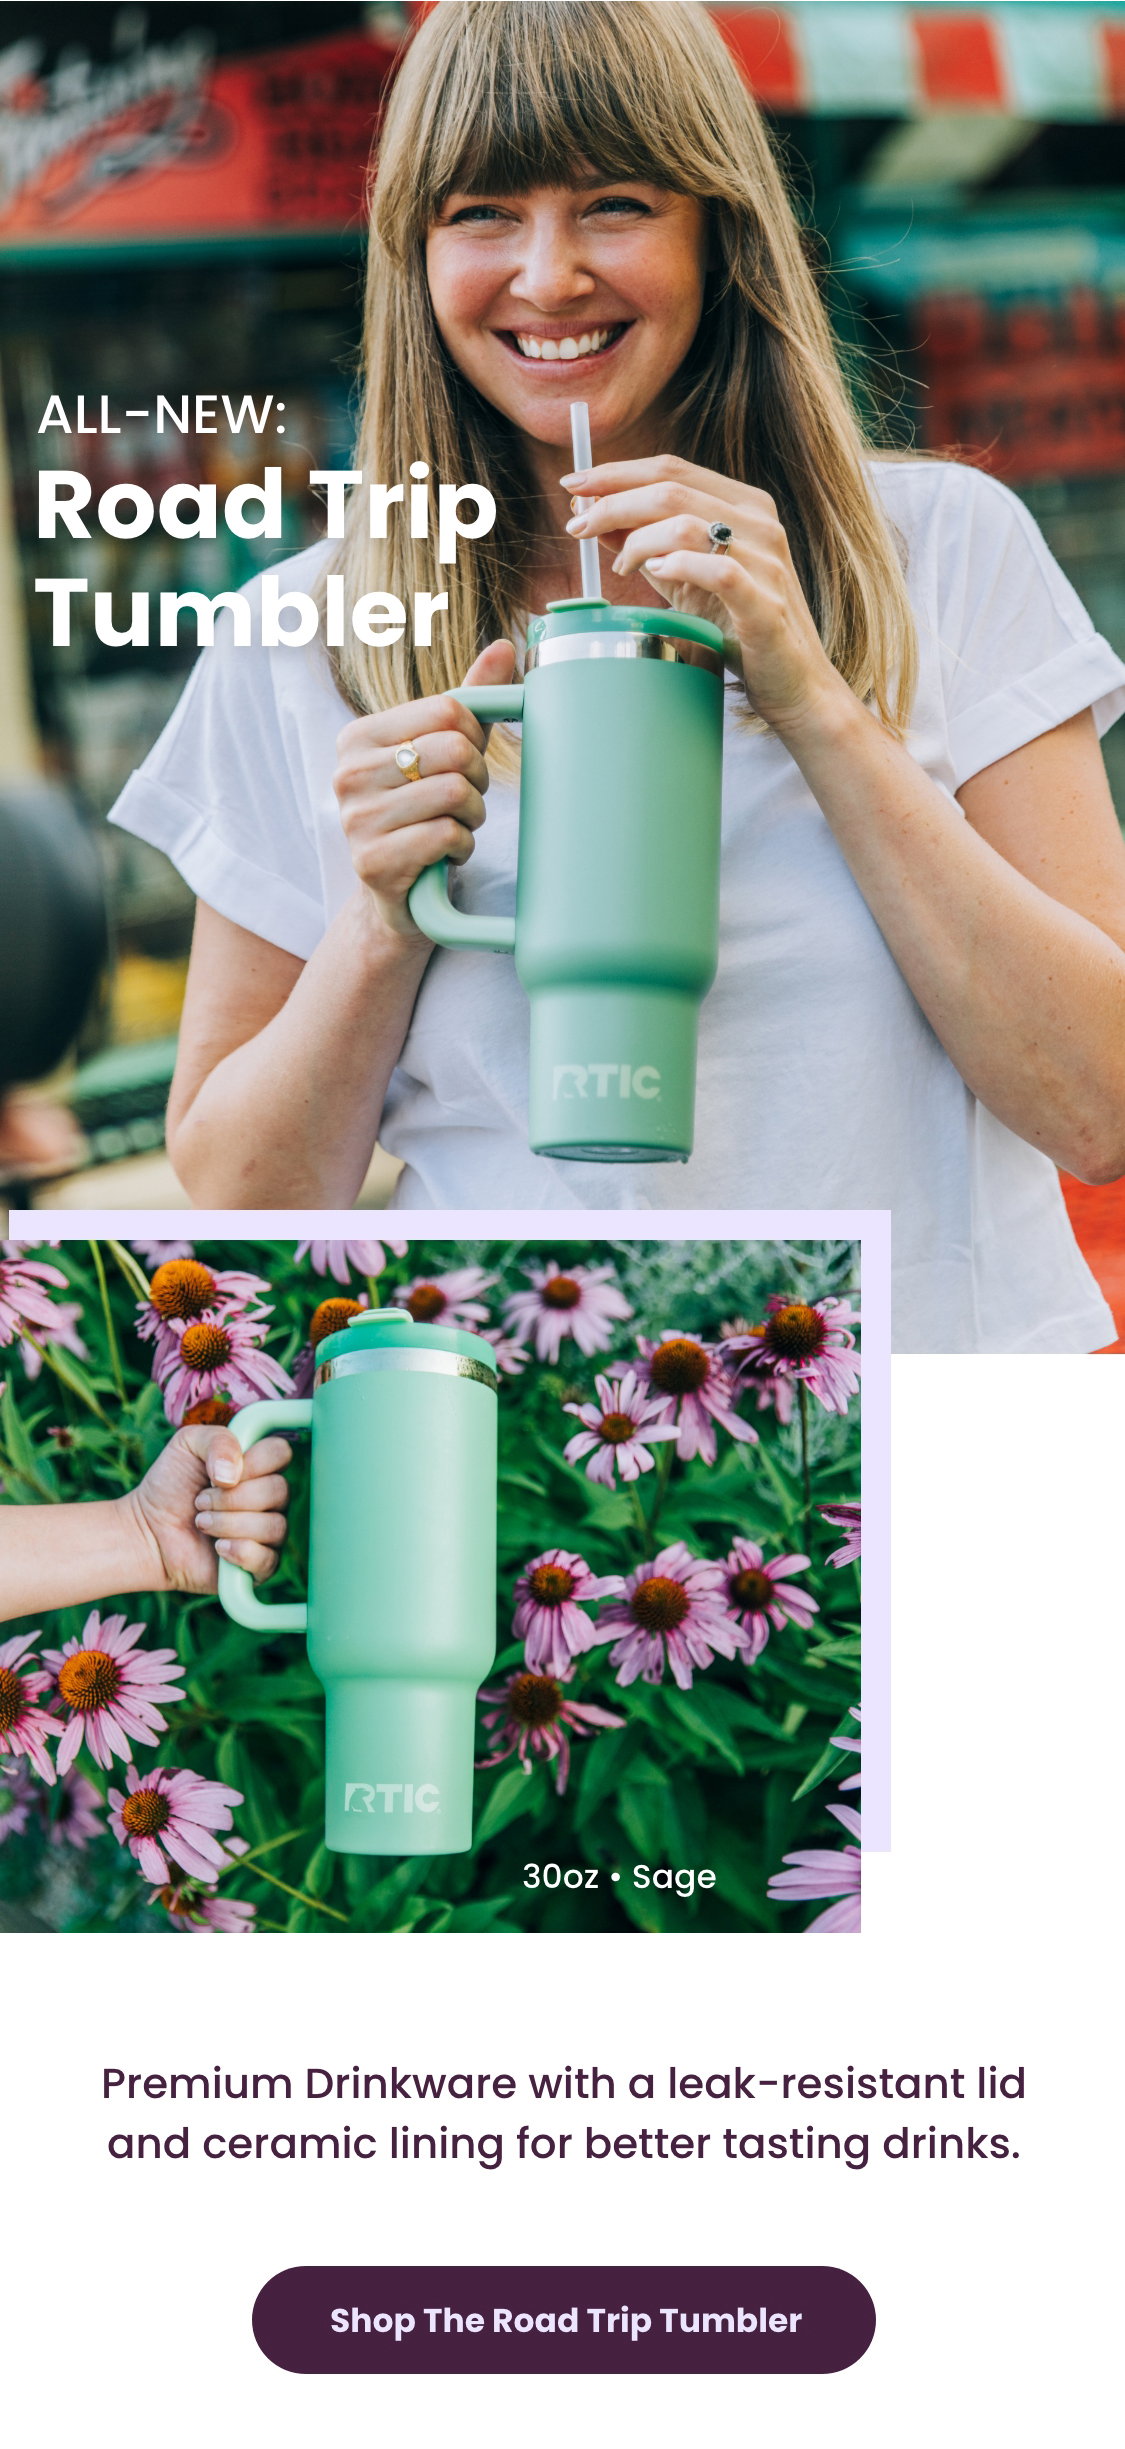 rtic's new road trip tumbler! Not sponsored, but hey - if they